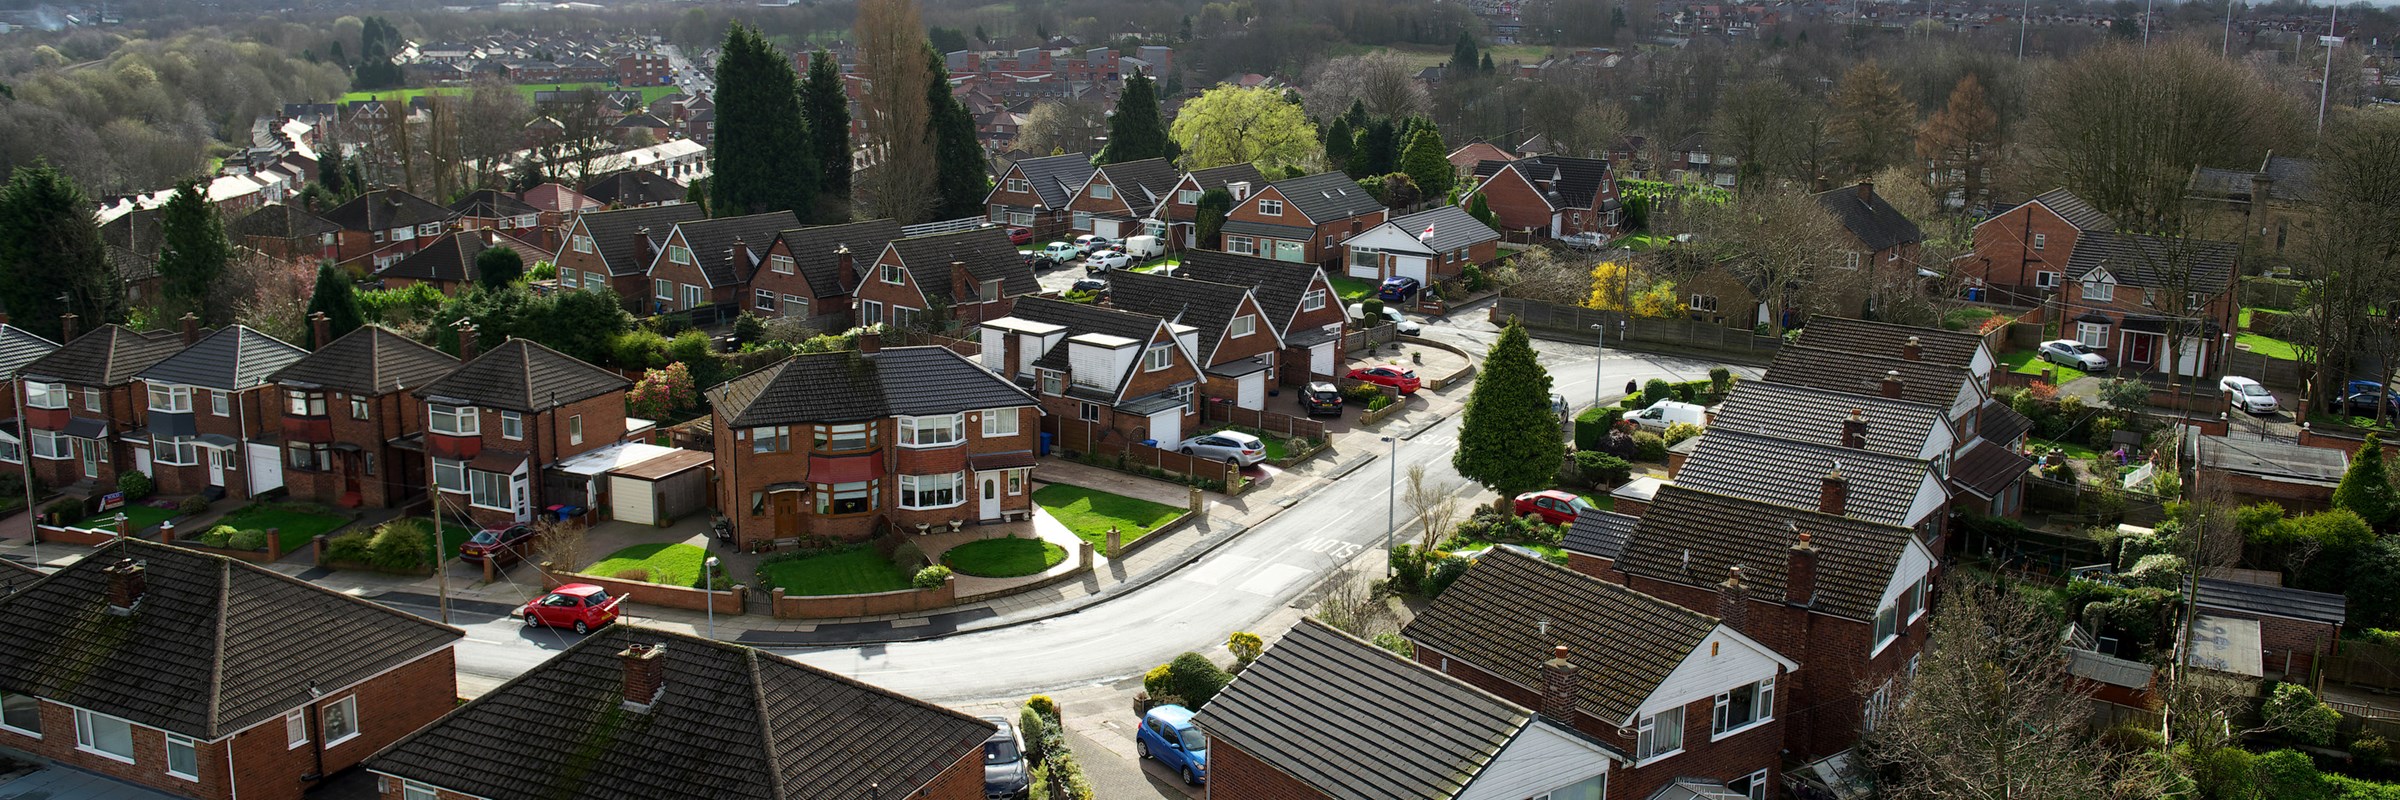 Houses on a street in a housing estate